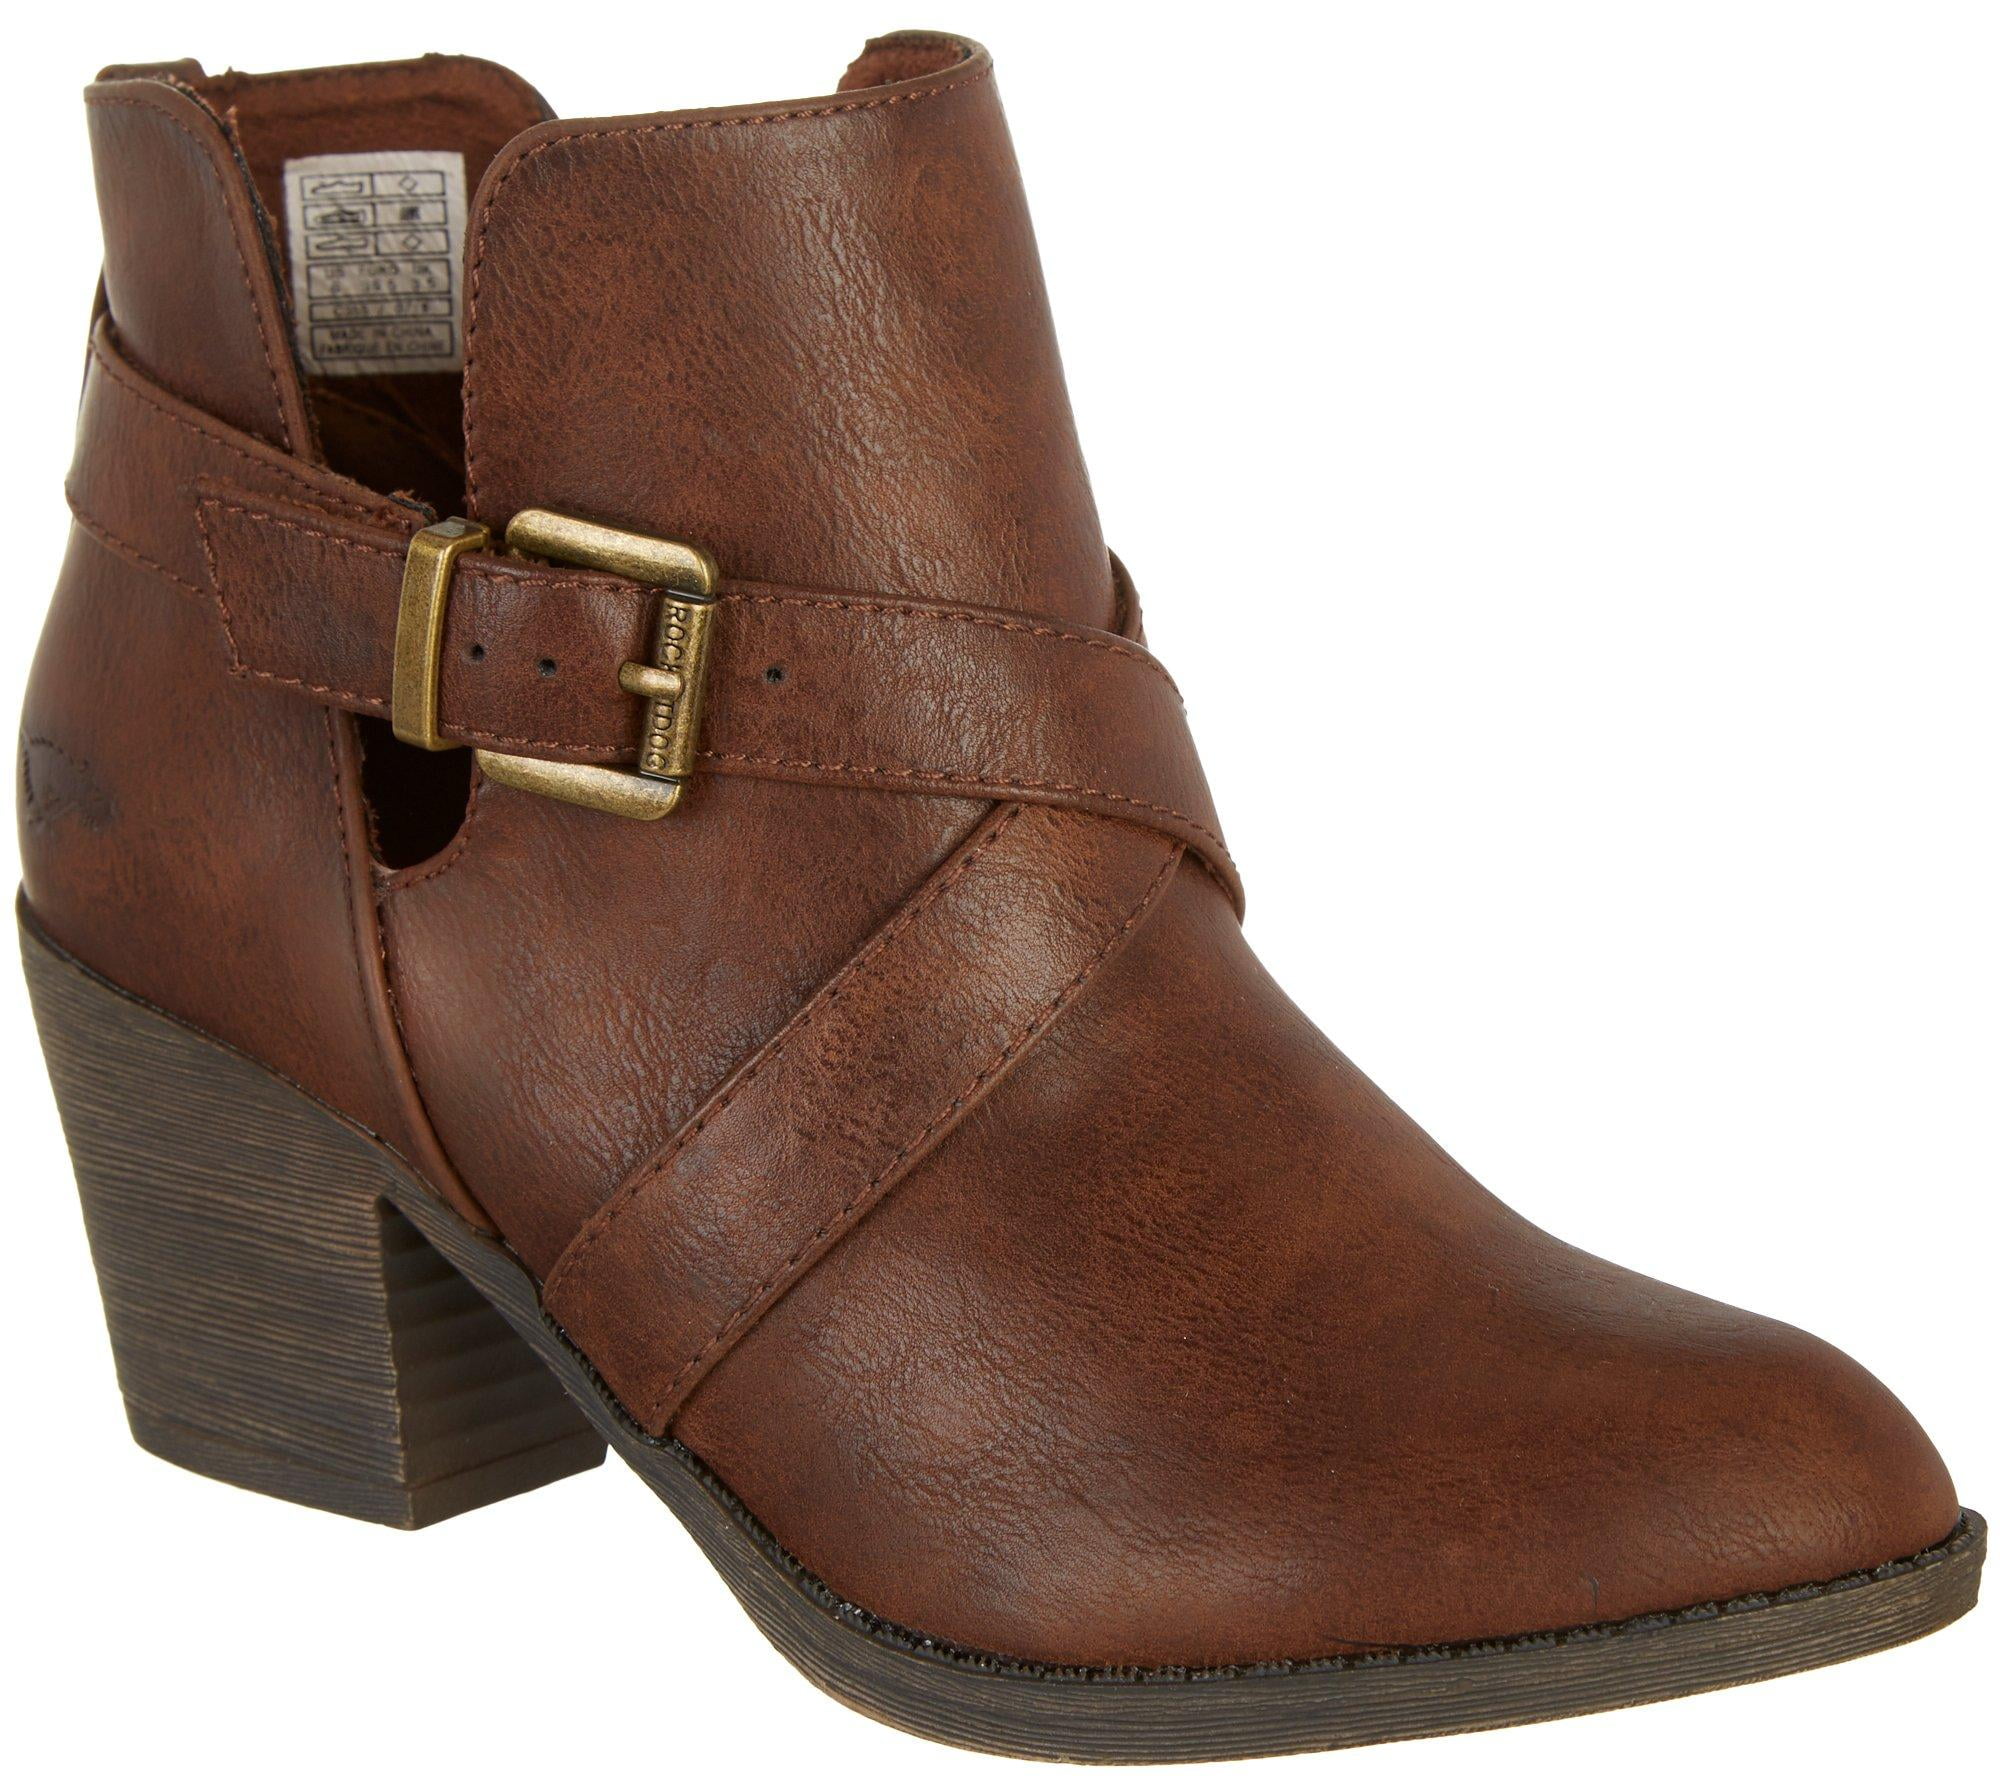 rocket dog women's ankle boots